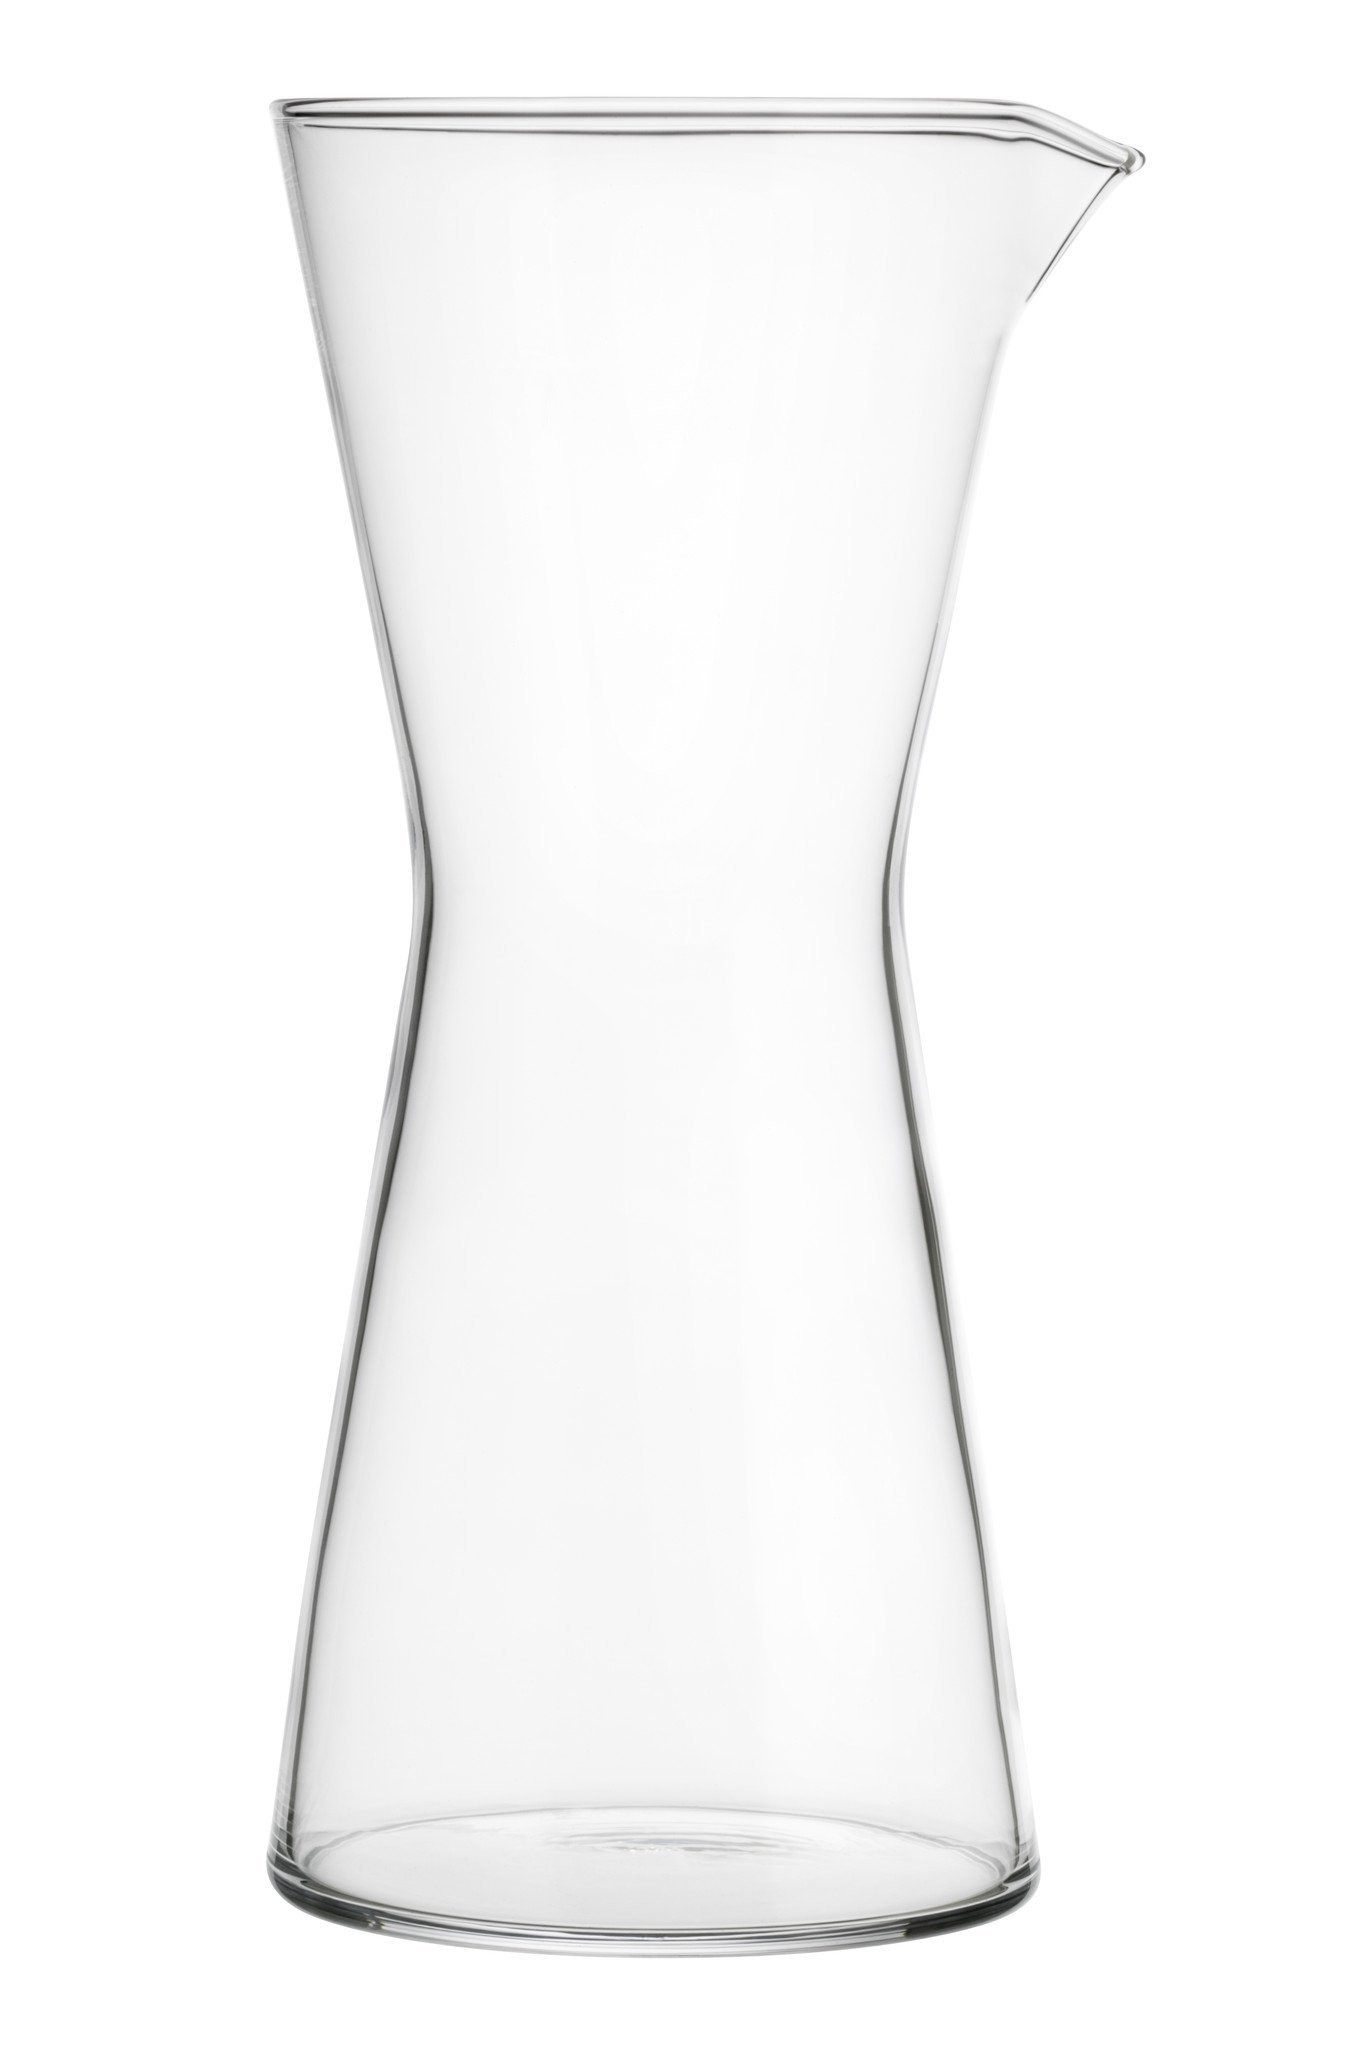 14 Ideal Ettore sottsass Vase 2023 free download ettore sottsass vase of serving 2 with iittala kartio carafe clear placewares